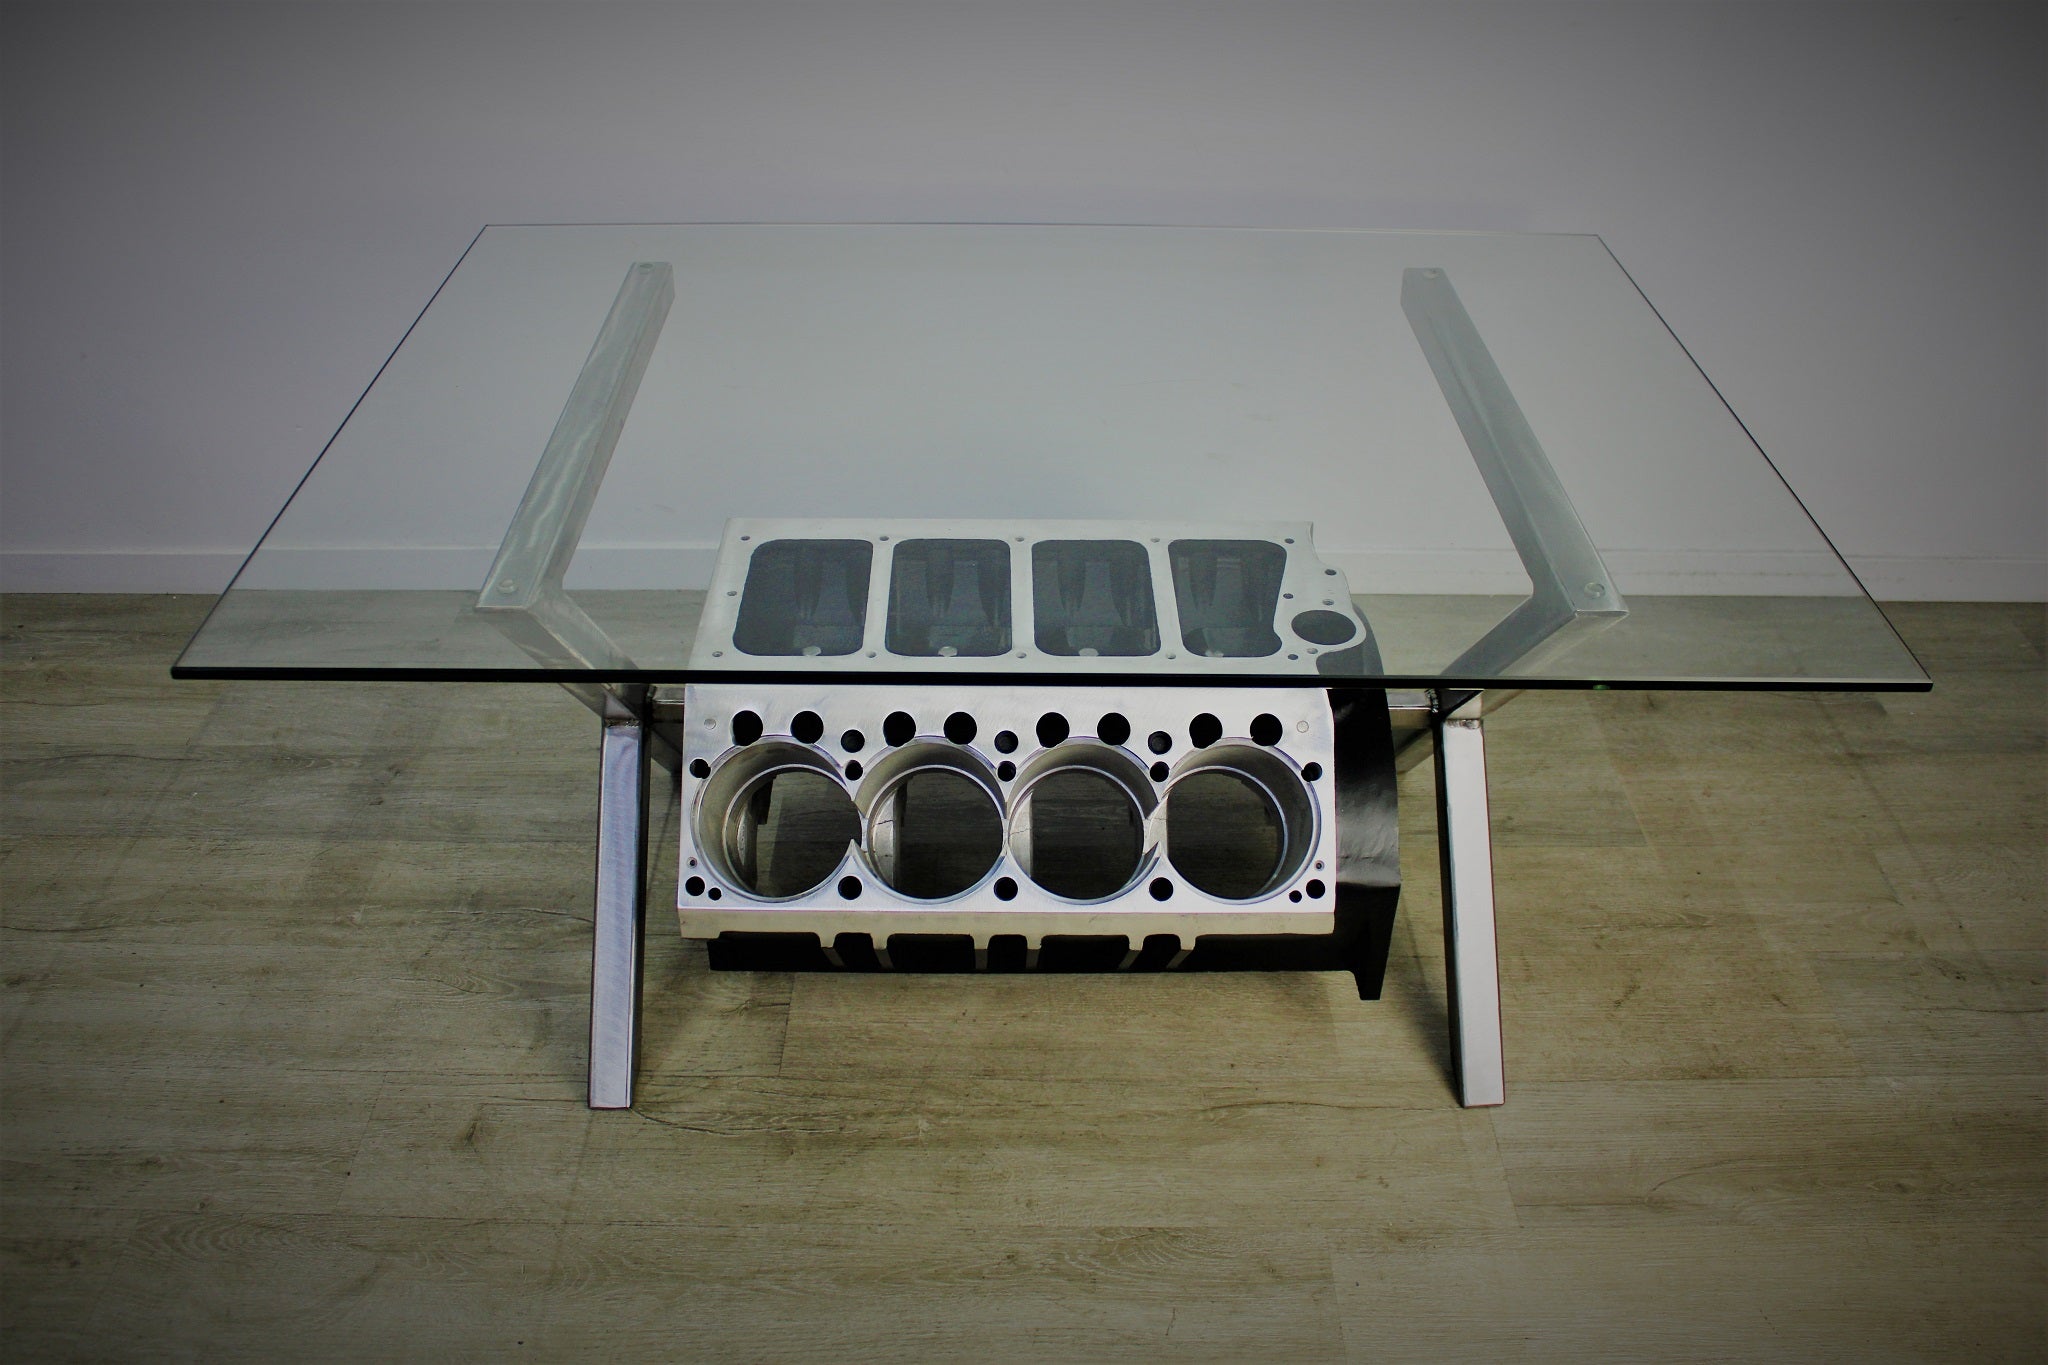 Top Fuel aluminum engine block coffee table finished in black and silver with a rectangular glass top.